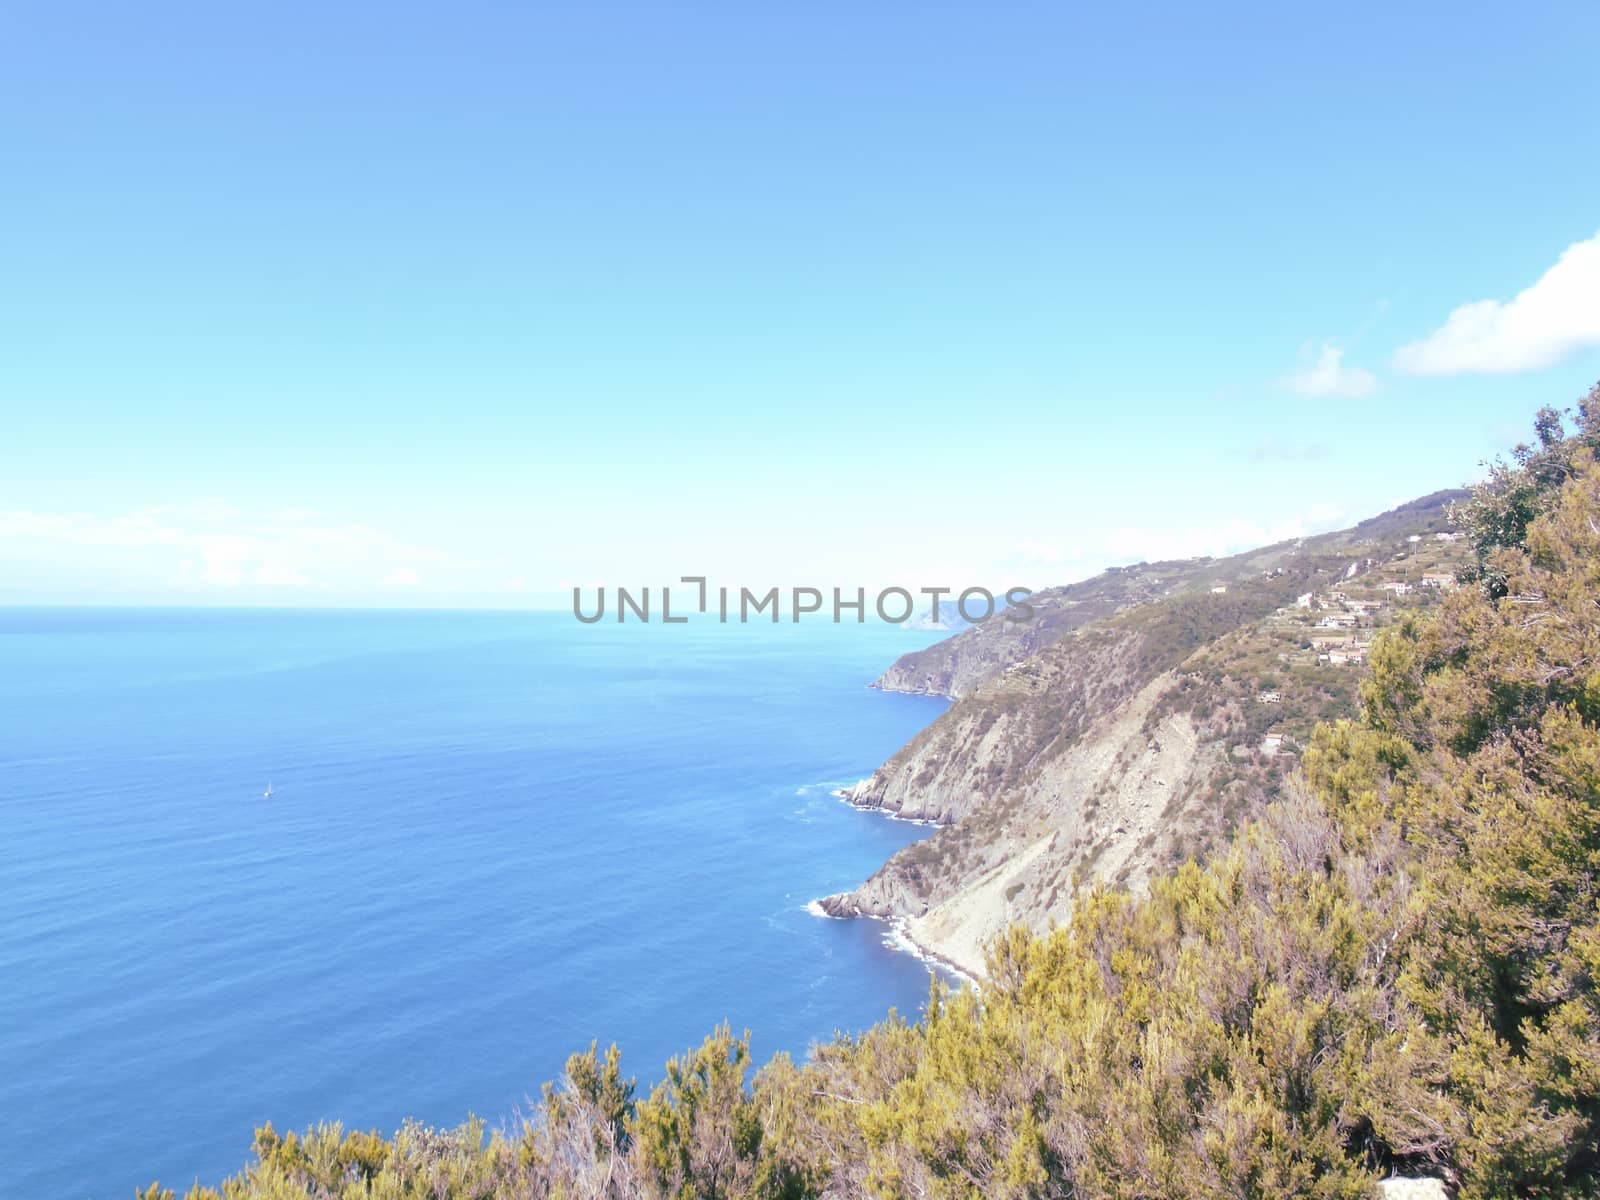 Liguria, Italy - 06/15/2020: Travelling around the ligurian seaside in summer days with beautiful view to the famous places. An amazing caption of the water and the sky reflection with blue sky.